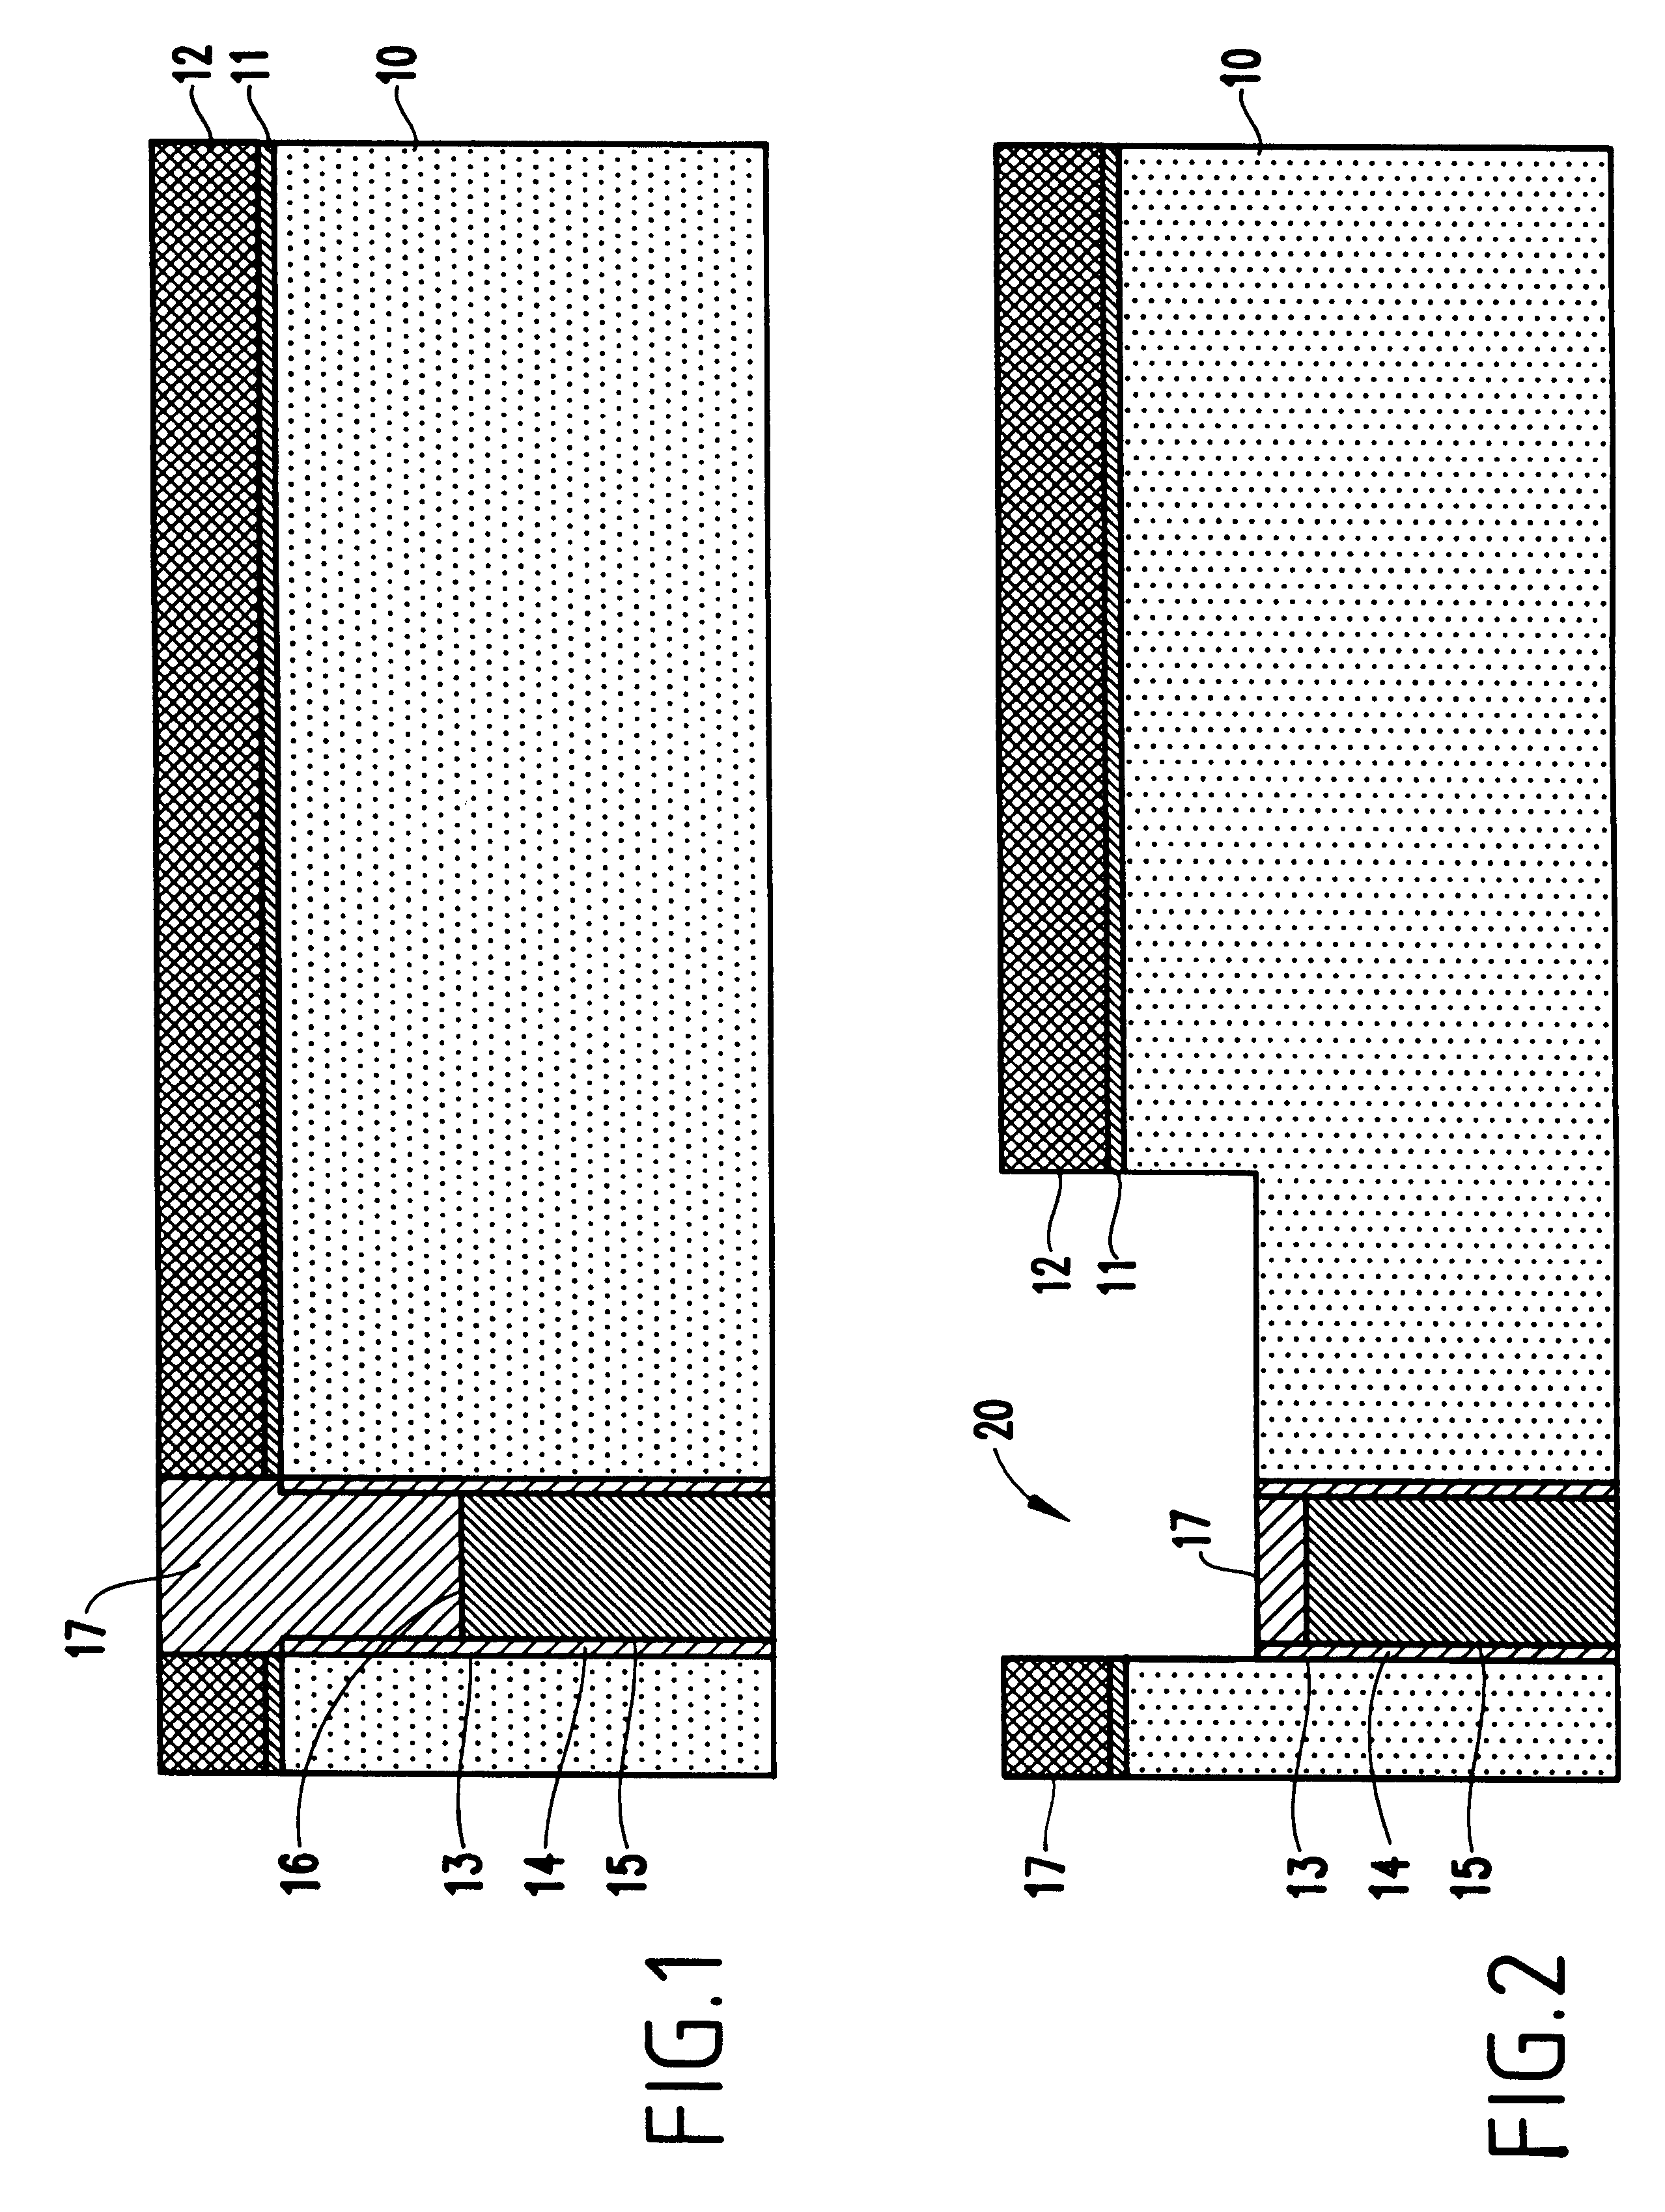 Formation of 5F2 cell with partially vertical transistor and gate conductor aligned buried strap with raised shallow trench isolation region